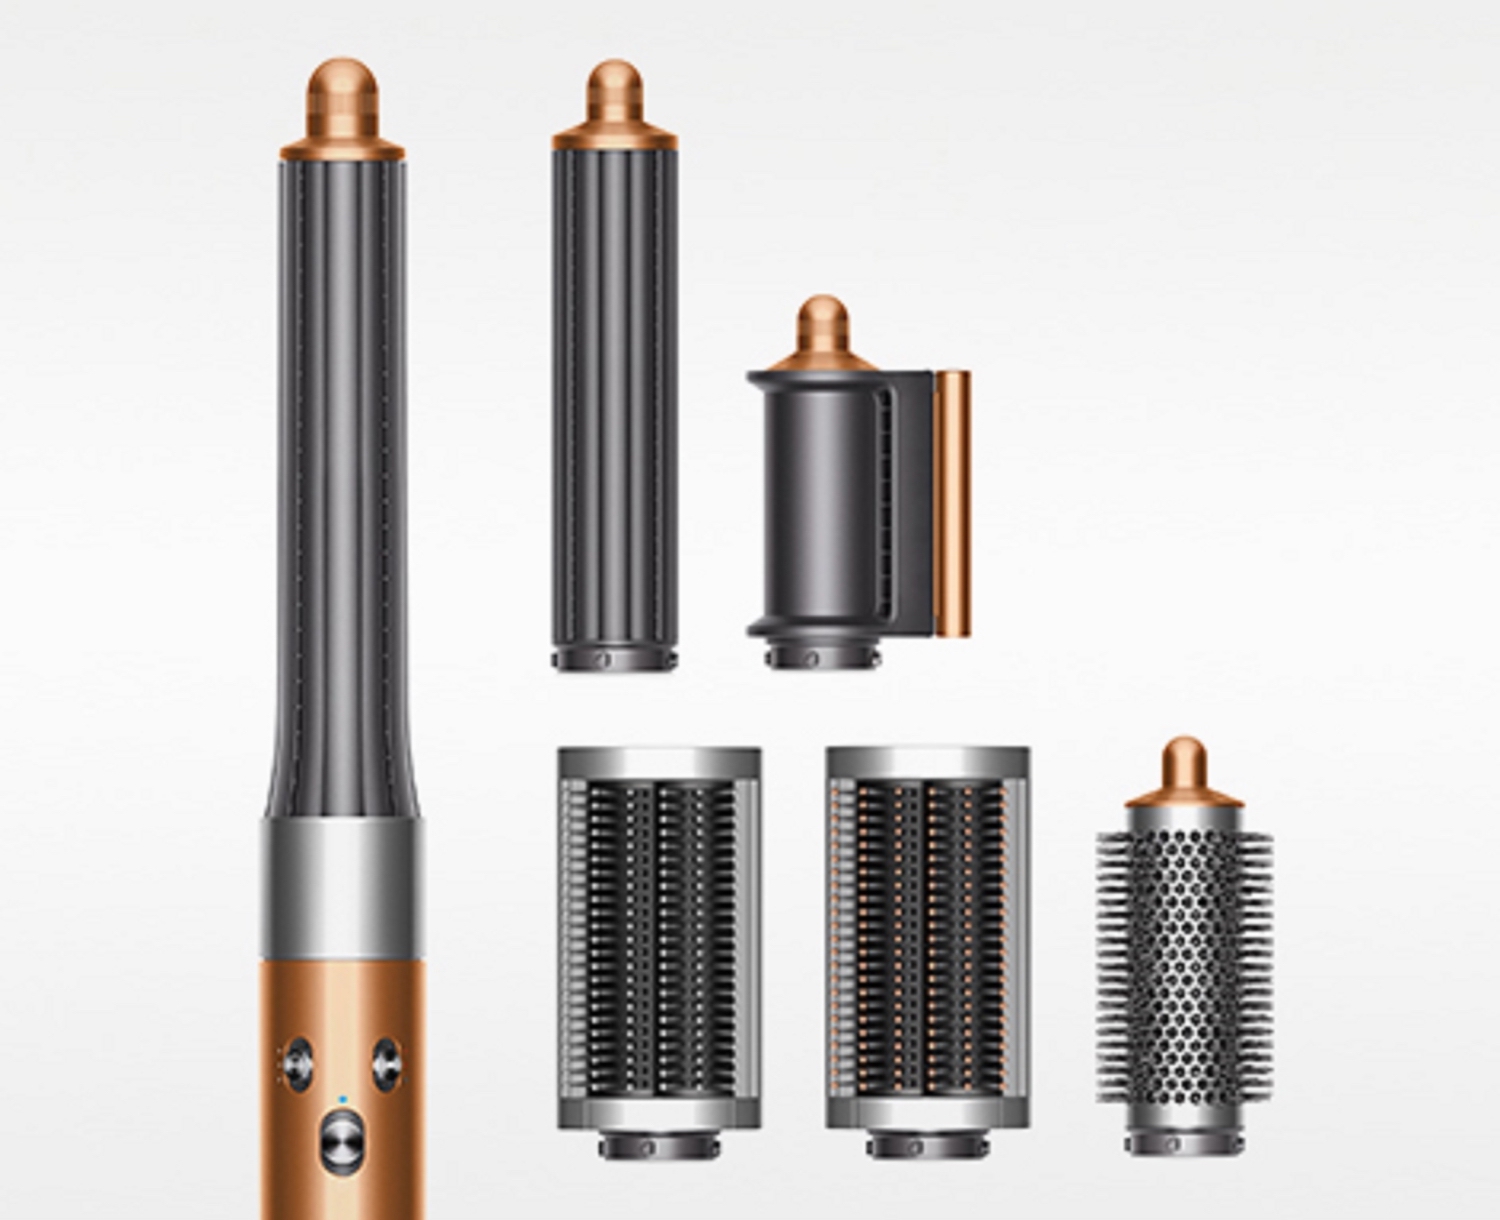 Refurbished (Excellent) - Dyson Official Outlet - Airwrap Styler Complete Long - Copper:Nickel - (1 Year Dyson Warranty)